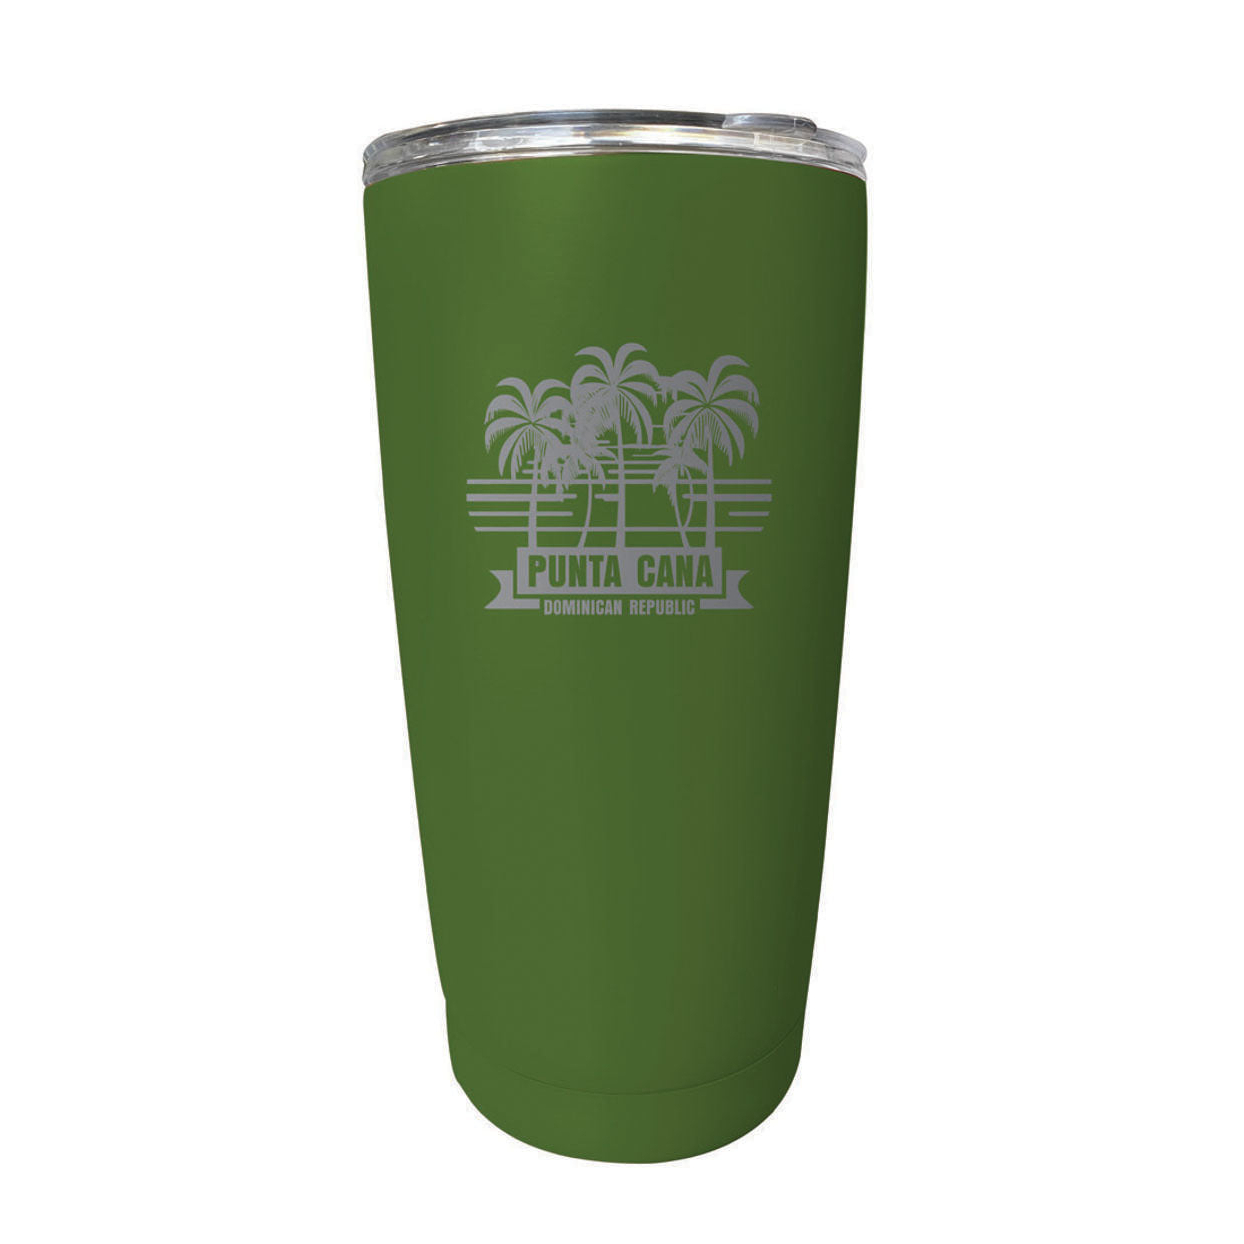 Punta Cana Dominican Republic Souvenir 16 Oz Stainless Steel Insulated Tumbler Etched - Black, PALM BEACH